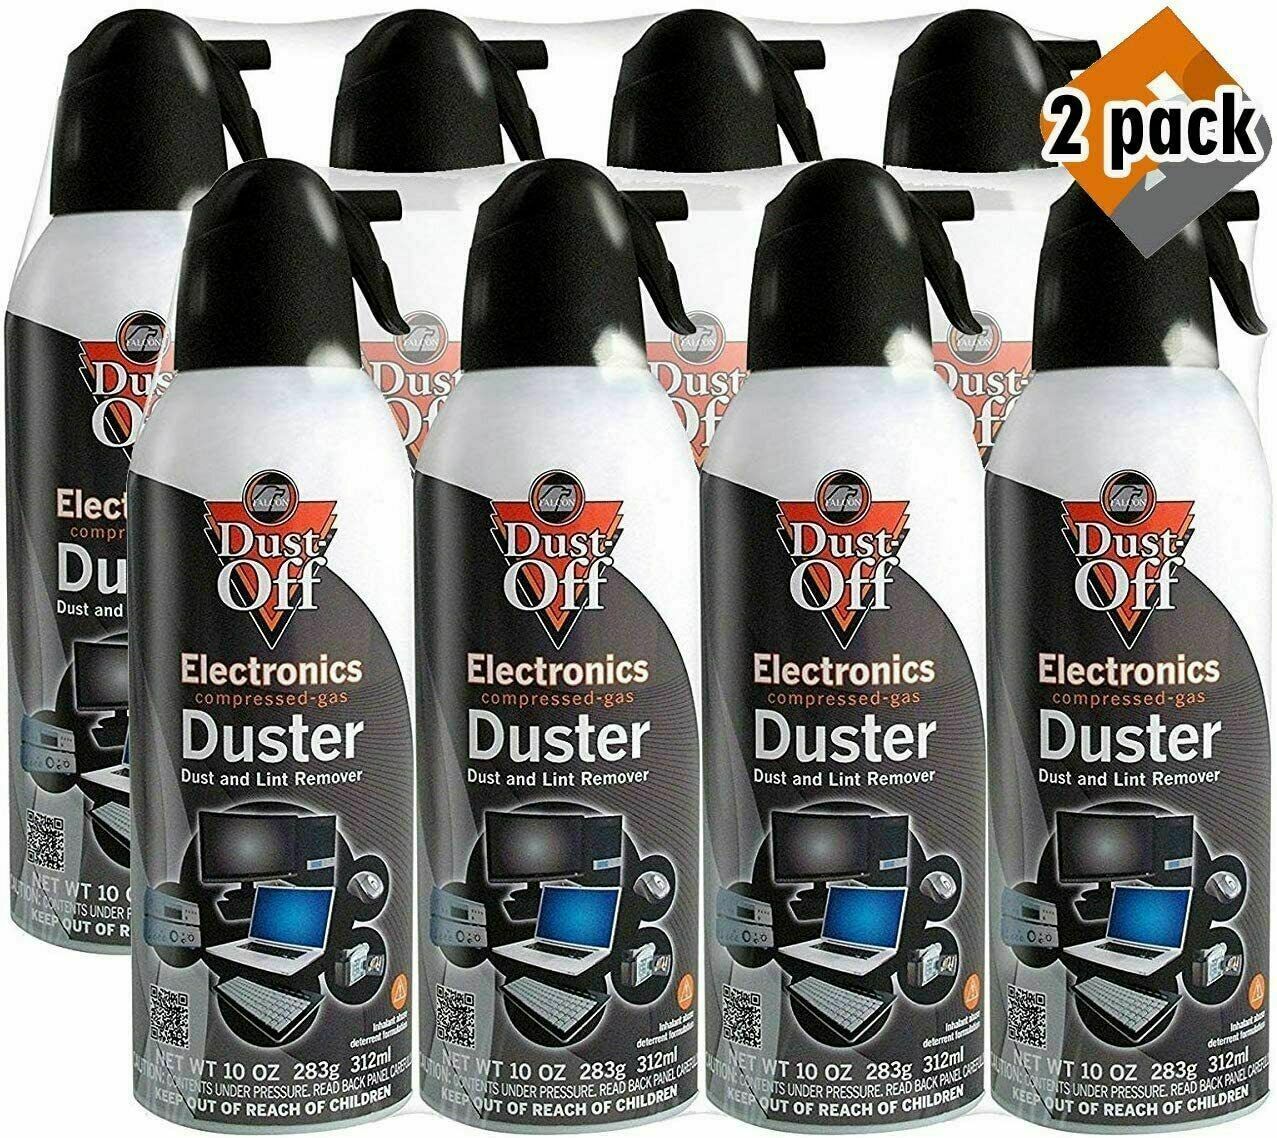 New Canned Air Falcon Dust-Off Compressed Computer Gas Duster 10 oz 8 Pack .....